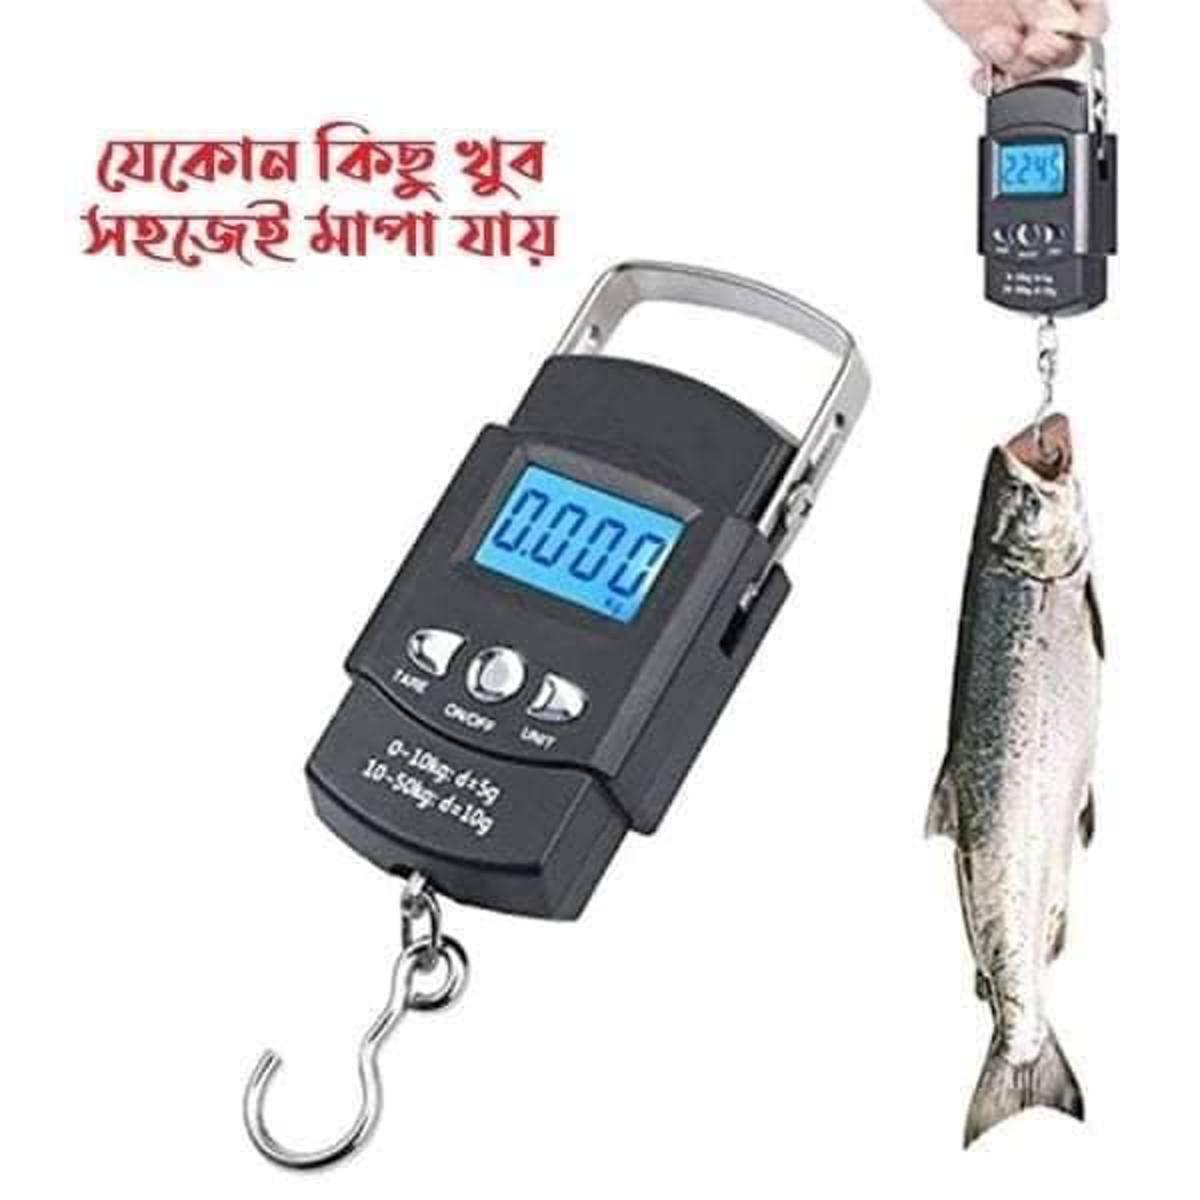 Kitchen Digital Fish Scale 110lb/50kg, Portable Luggage Weight